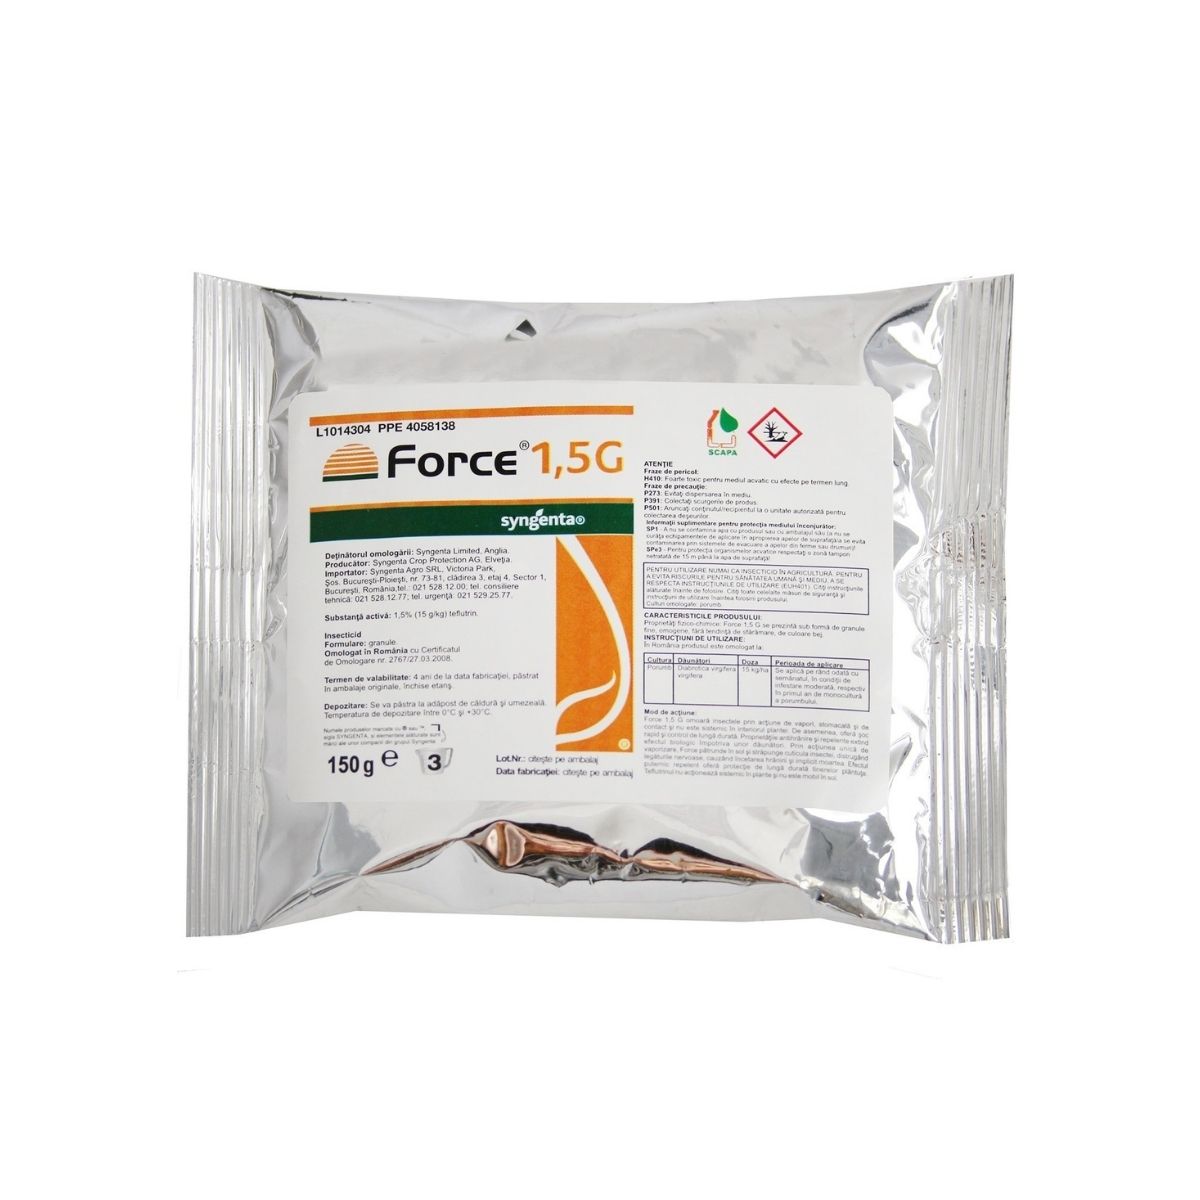 Insecticide - Insecticid de baza in combaterea daunatorilor din sol Force 1.5 G, 150 grame, hectarul.ro